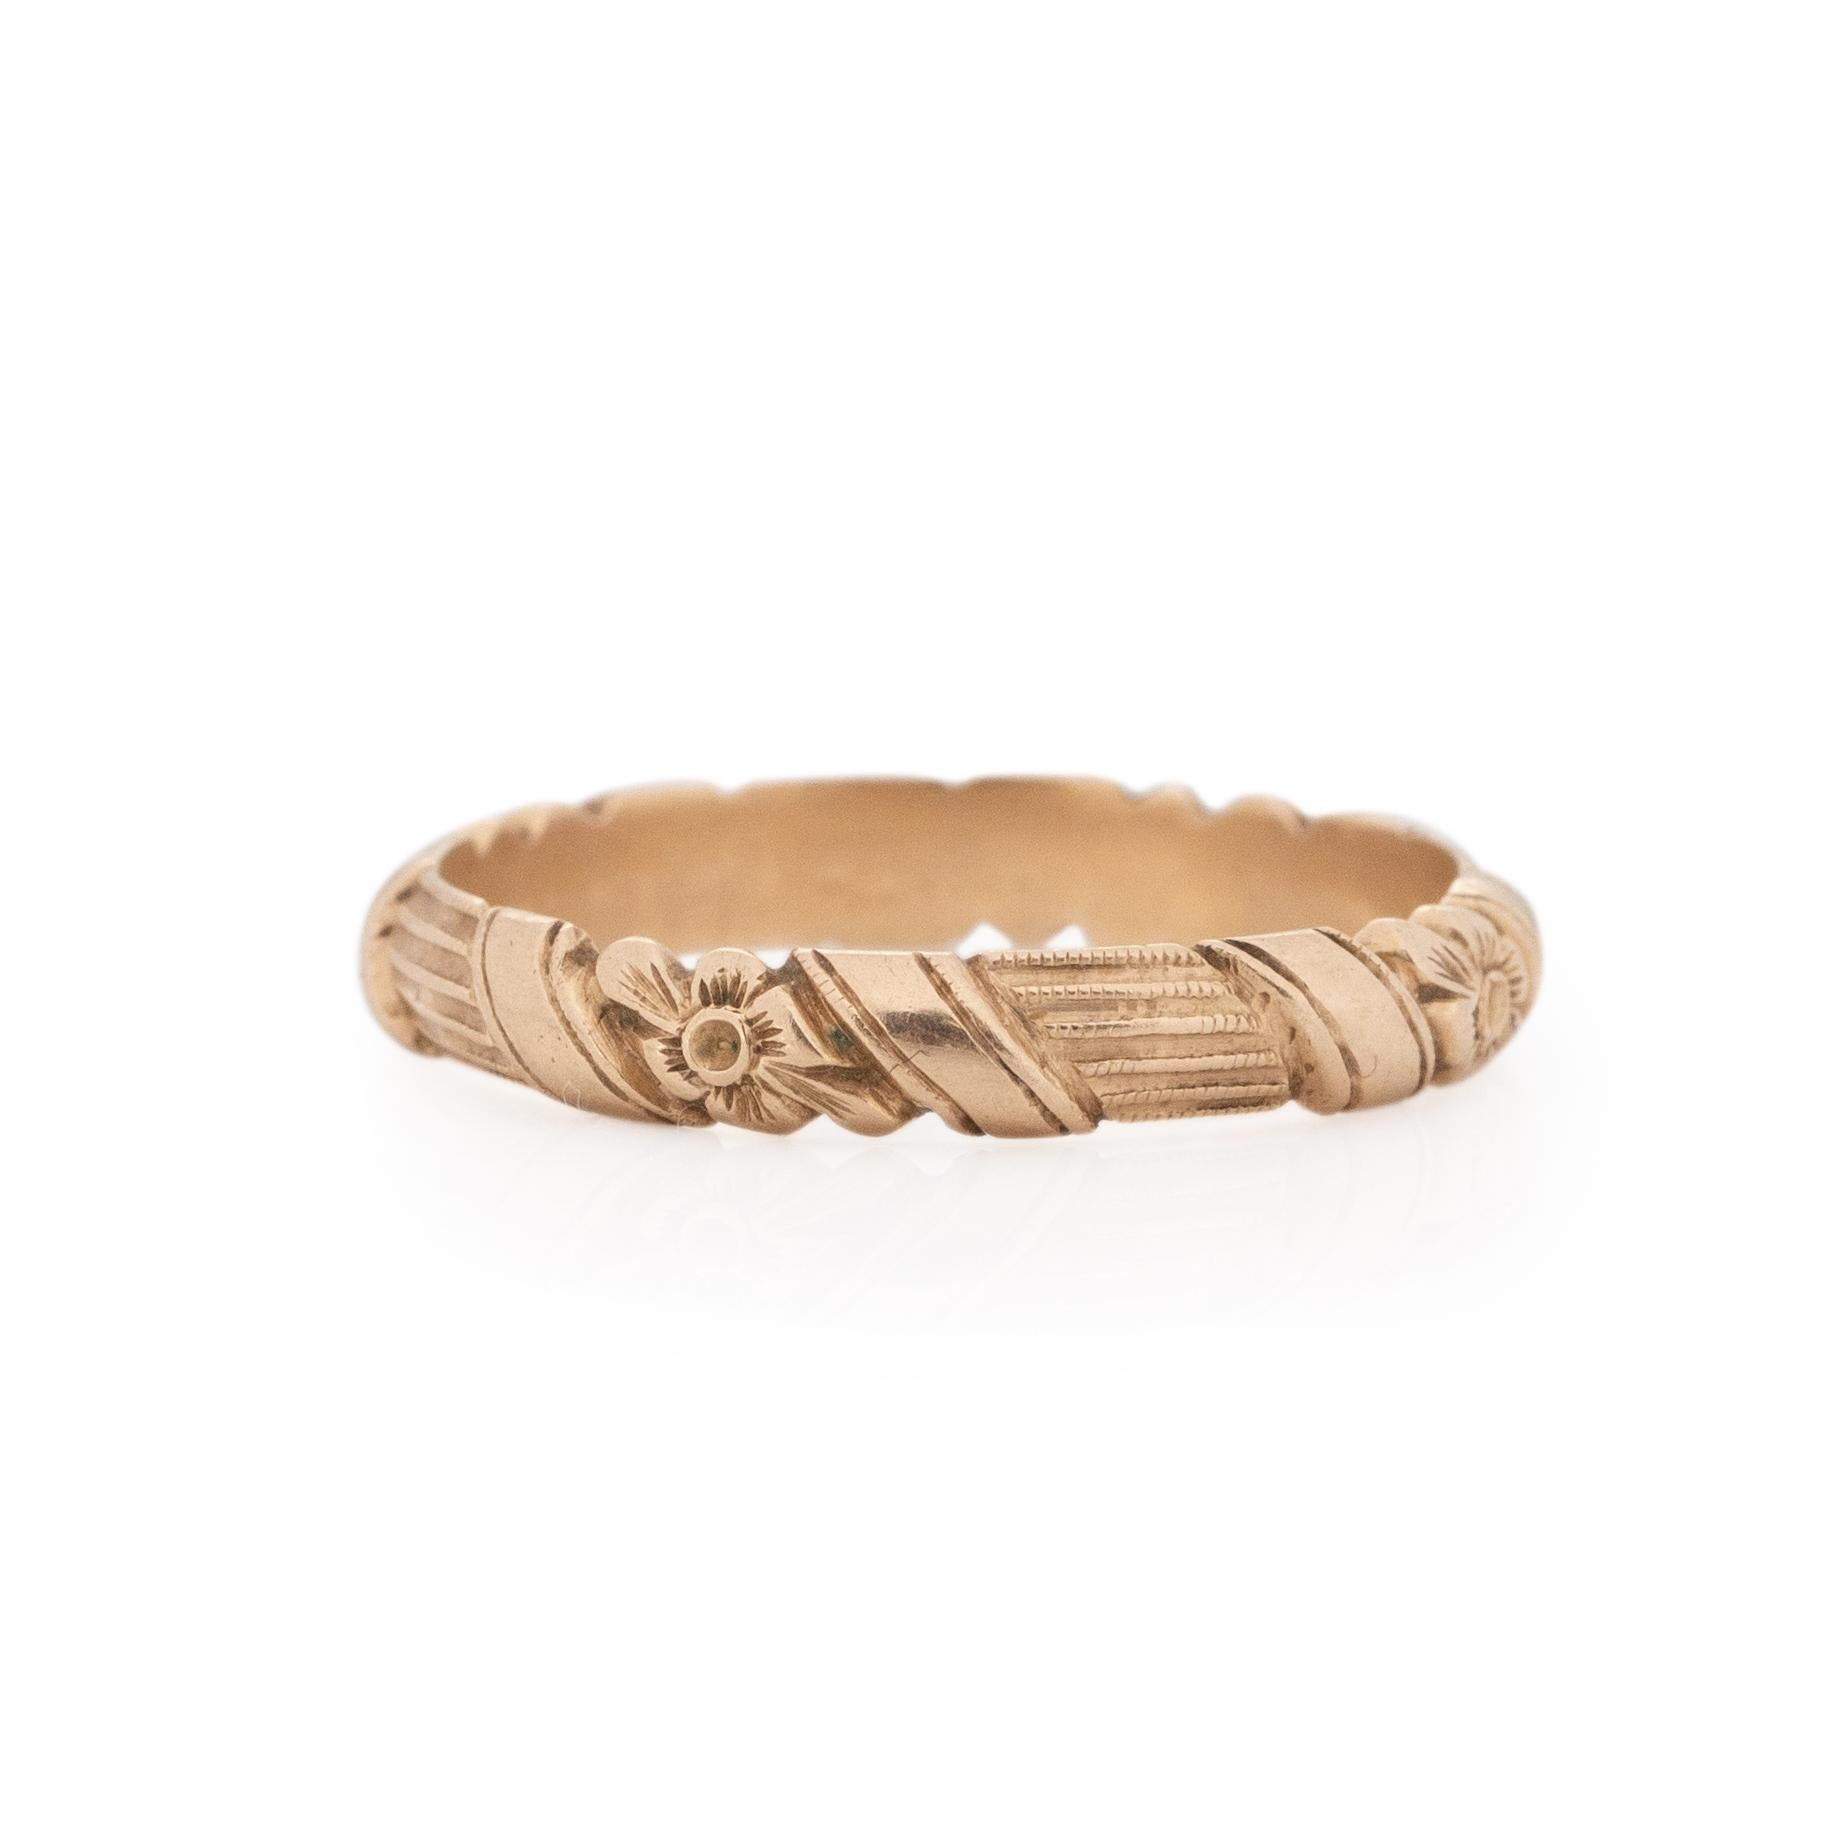 Here we have a beautiful Art deco classic. Crafted in 14K Yellow Gold this band is versatile and timeless, the basic pattern has beautiful floral details. The carvings are clean and have passed the test of time. This band would look great paired